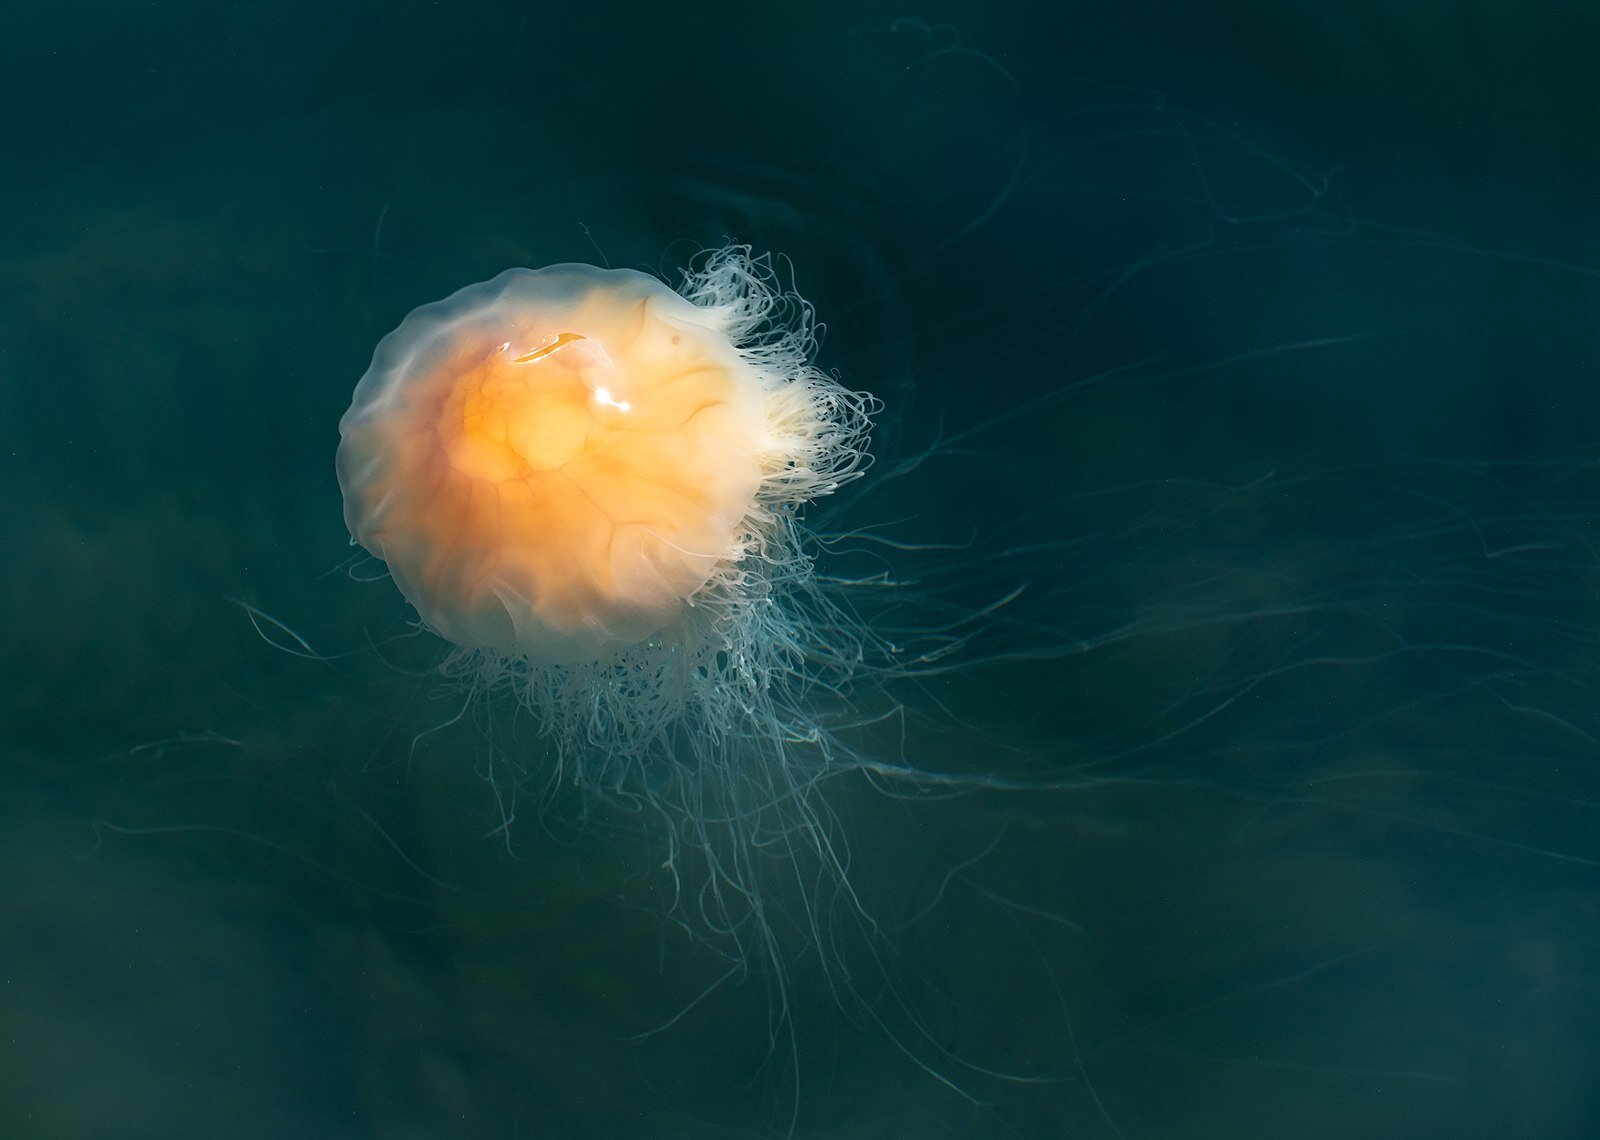 Jellyfish types most commonly found in waters around the UK.